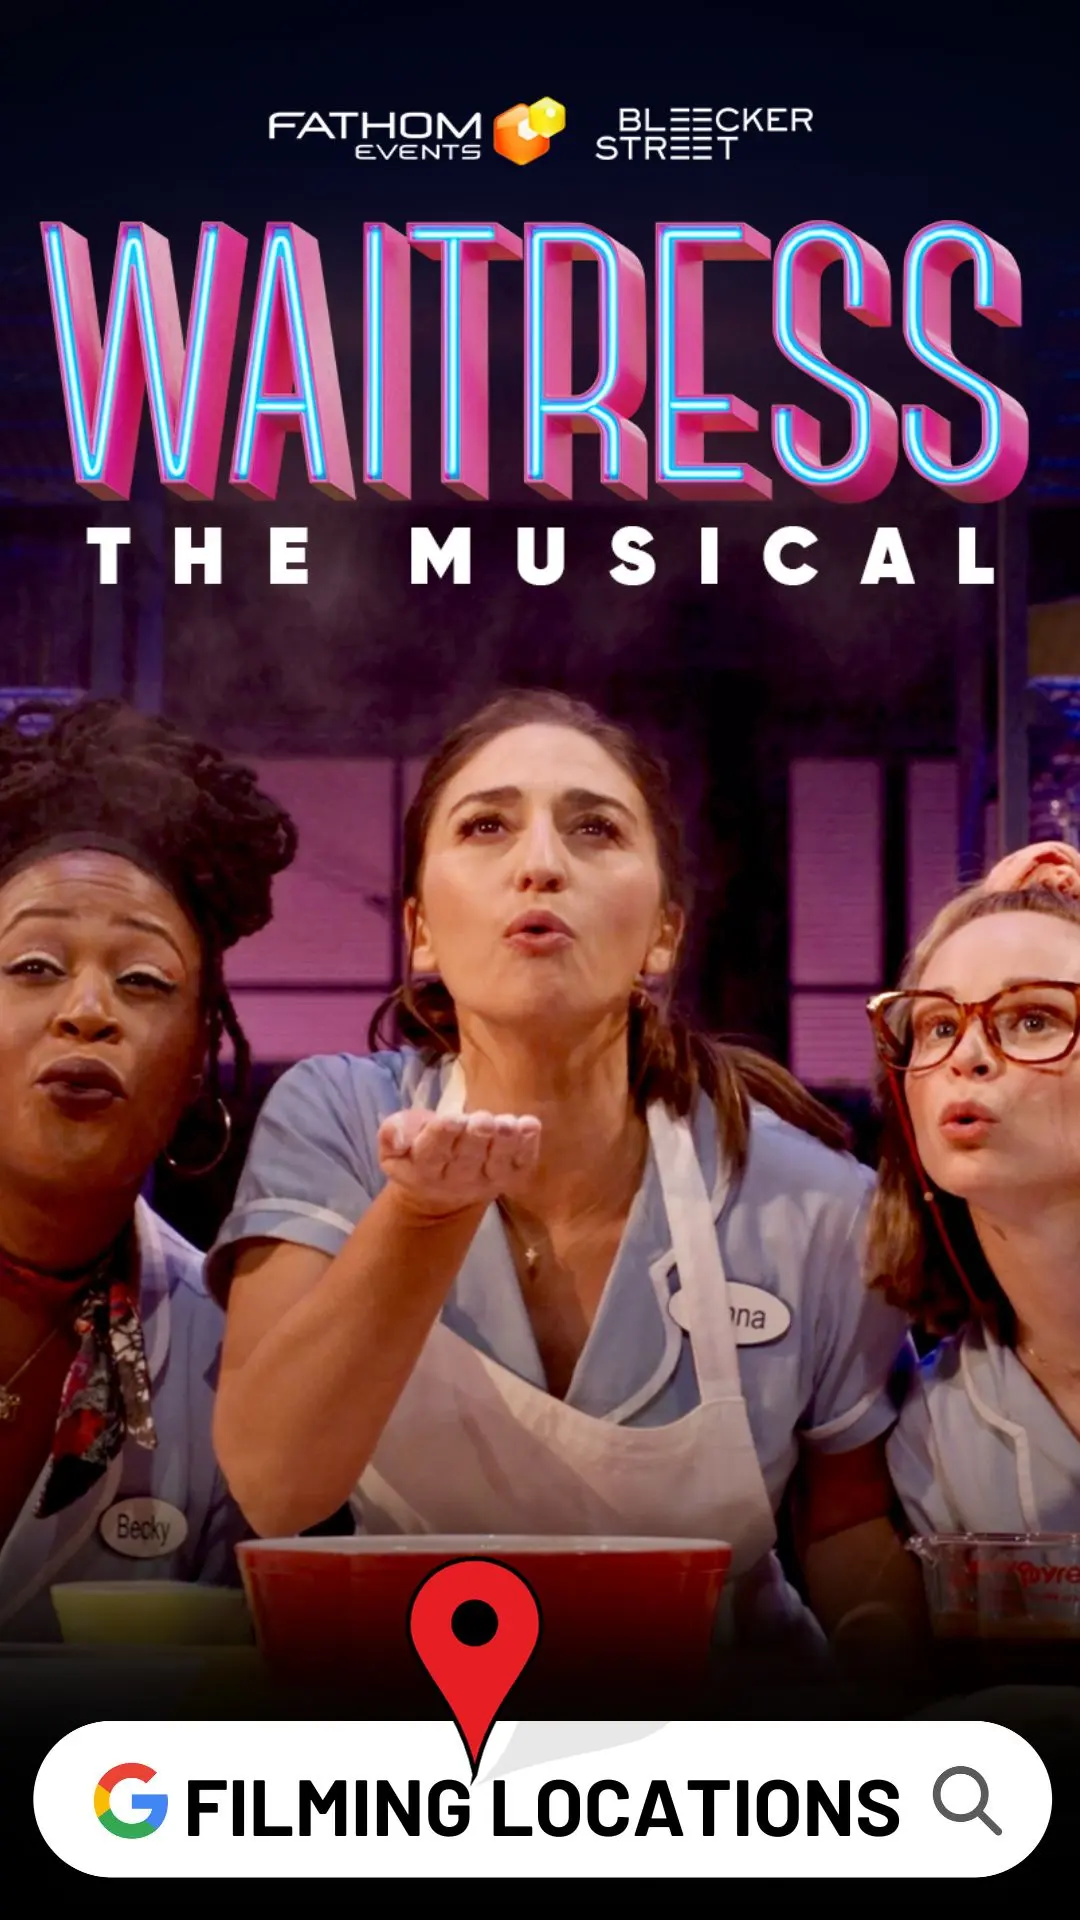 Waitress The Musical Filming Locations